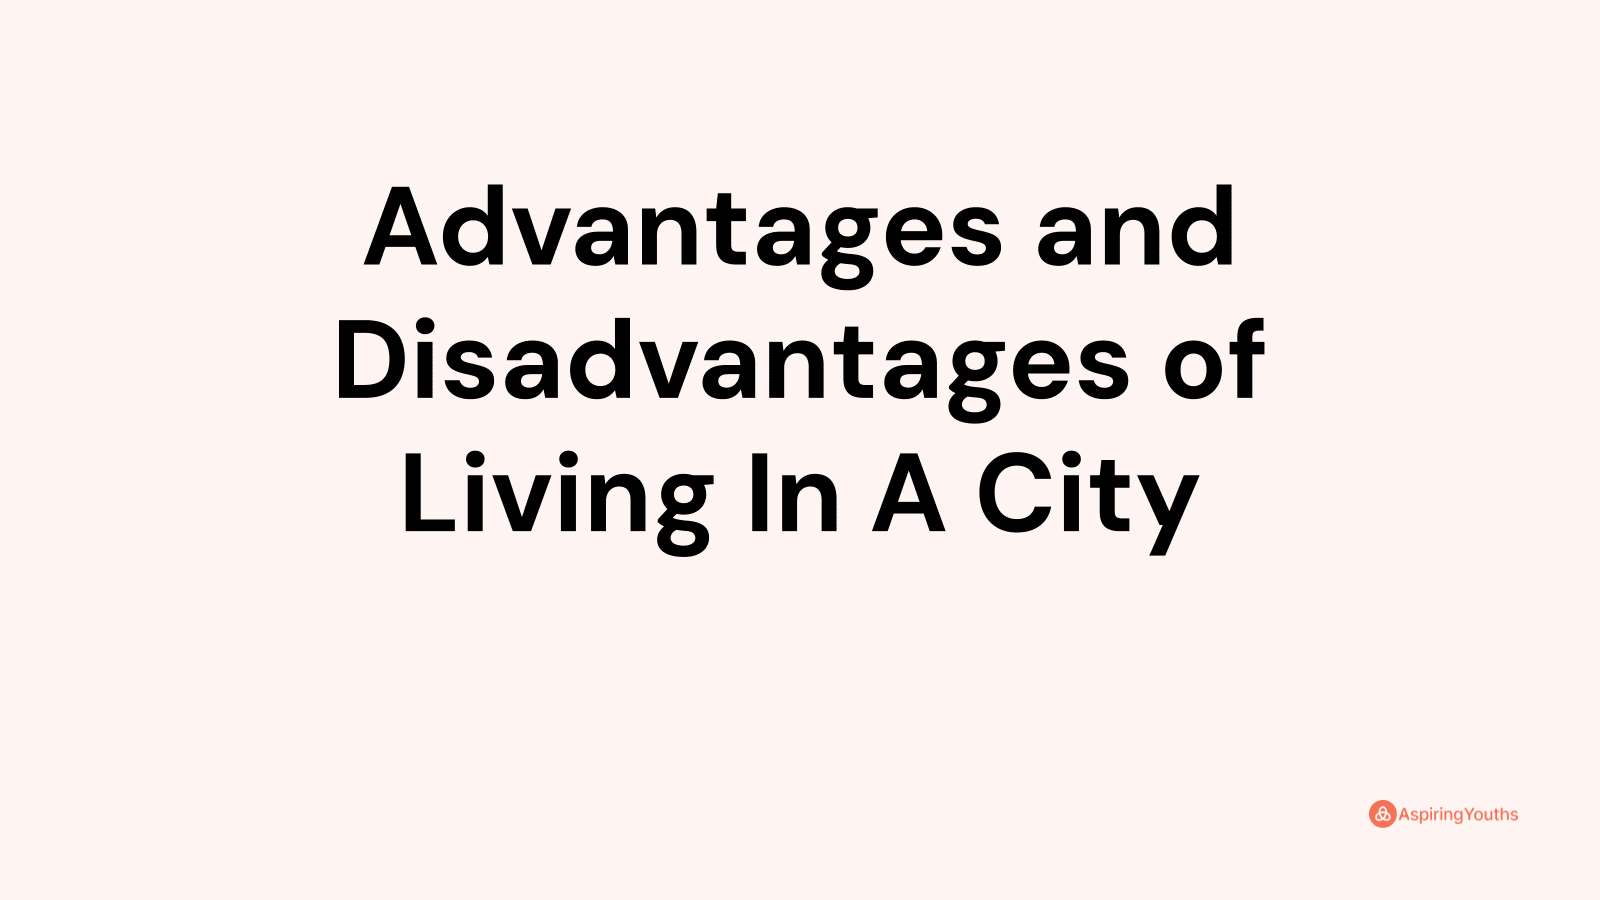 Advantages and disadvantages of Living In A City